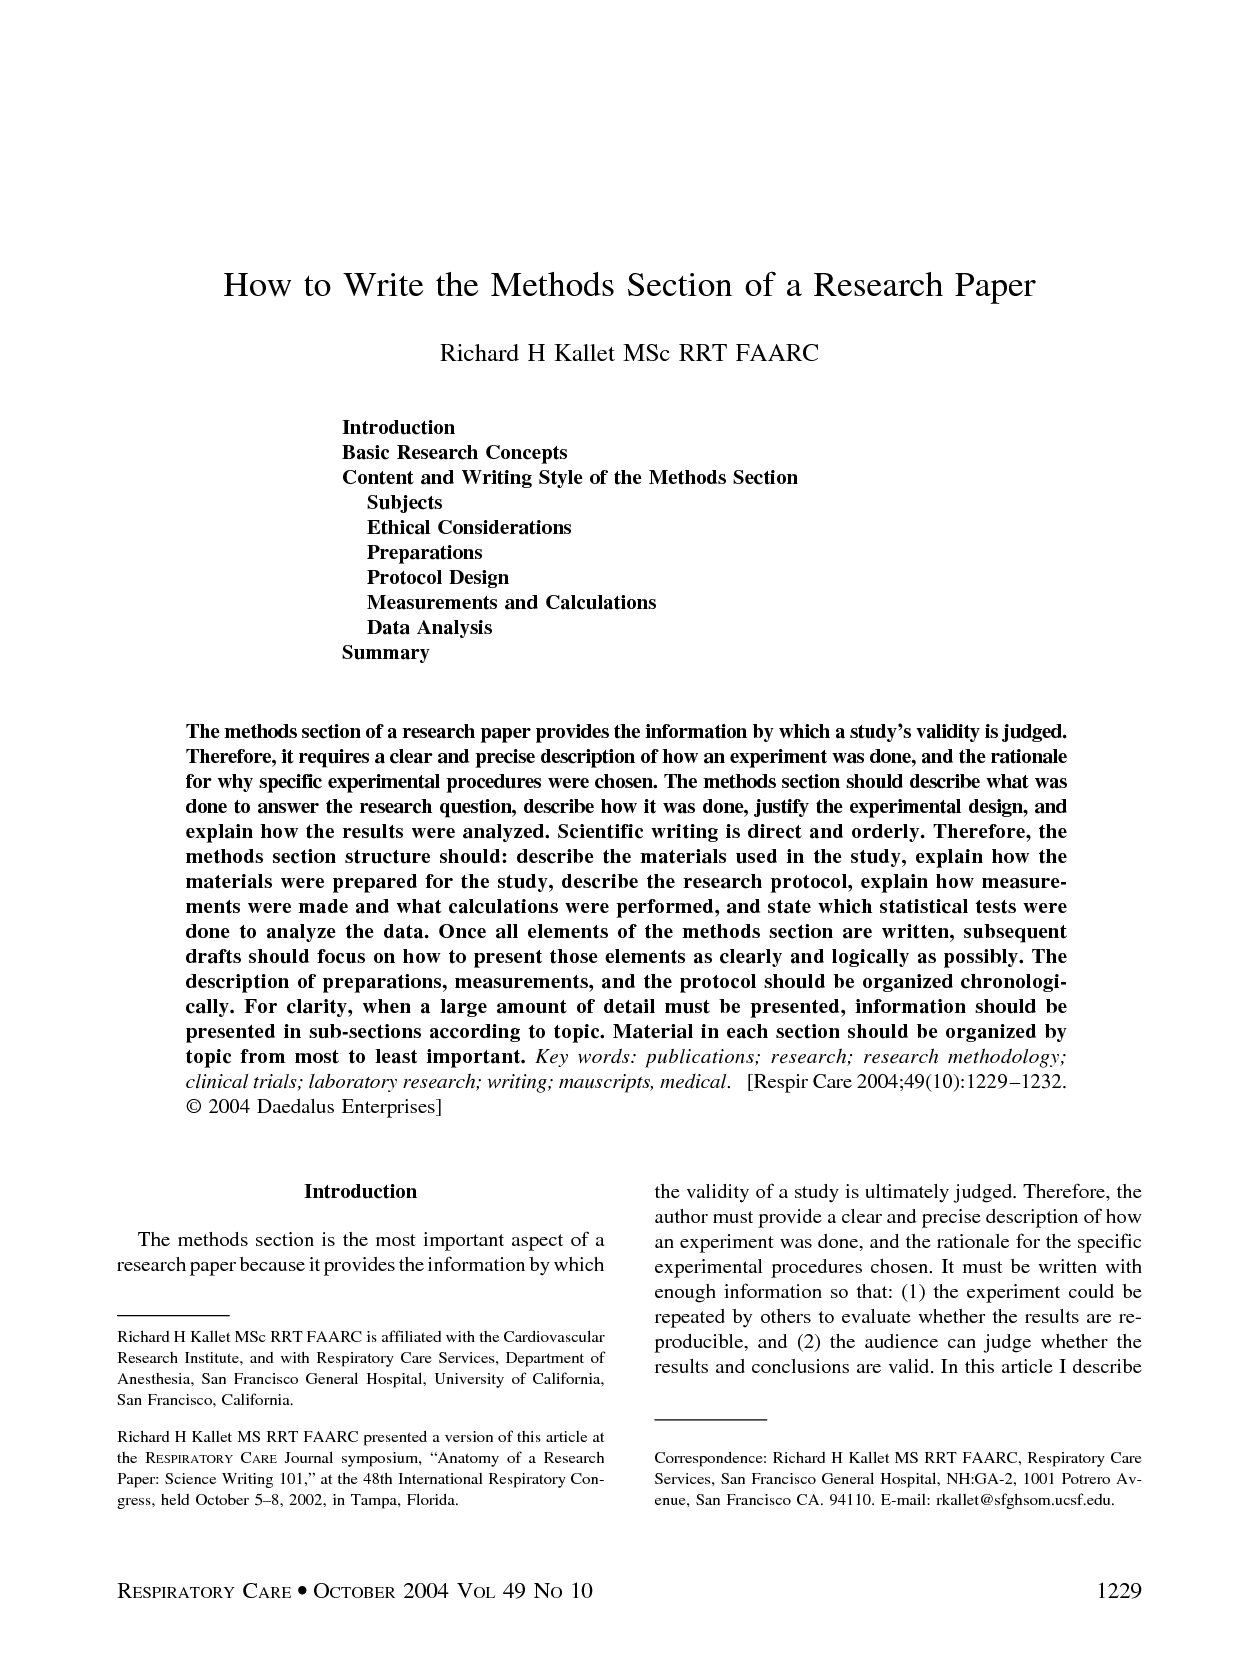 How to write a methodology section for a research paper